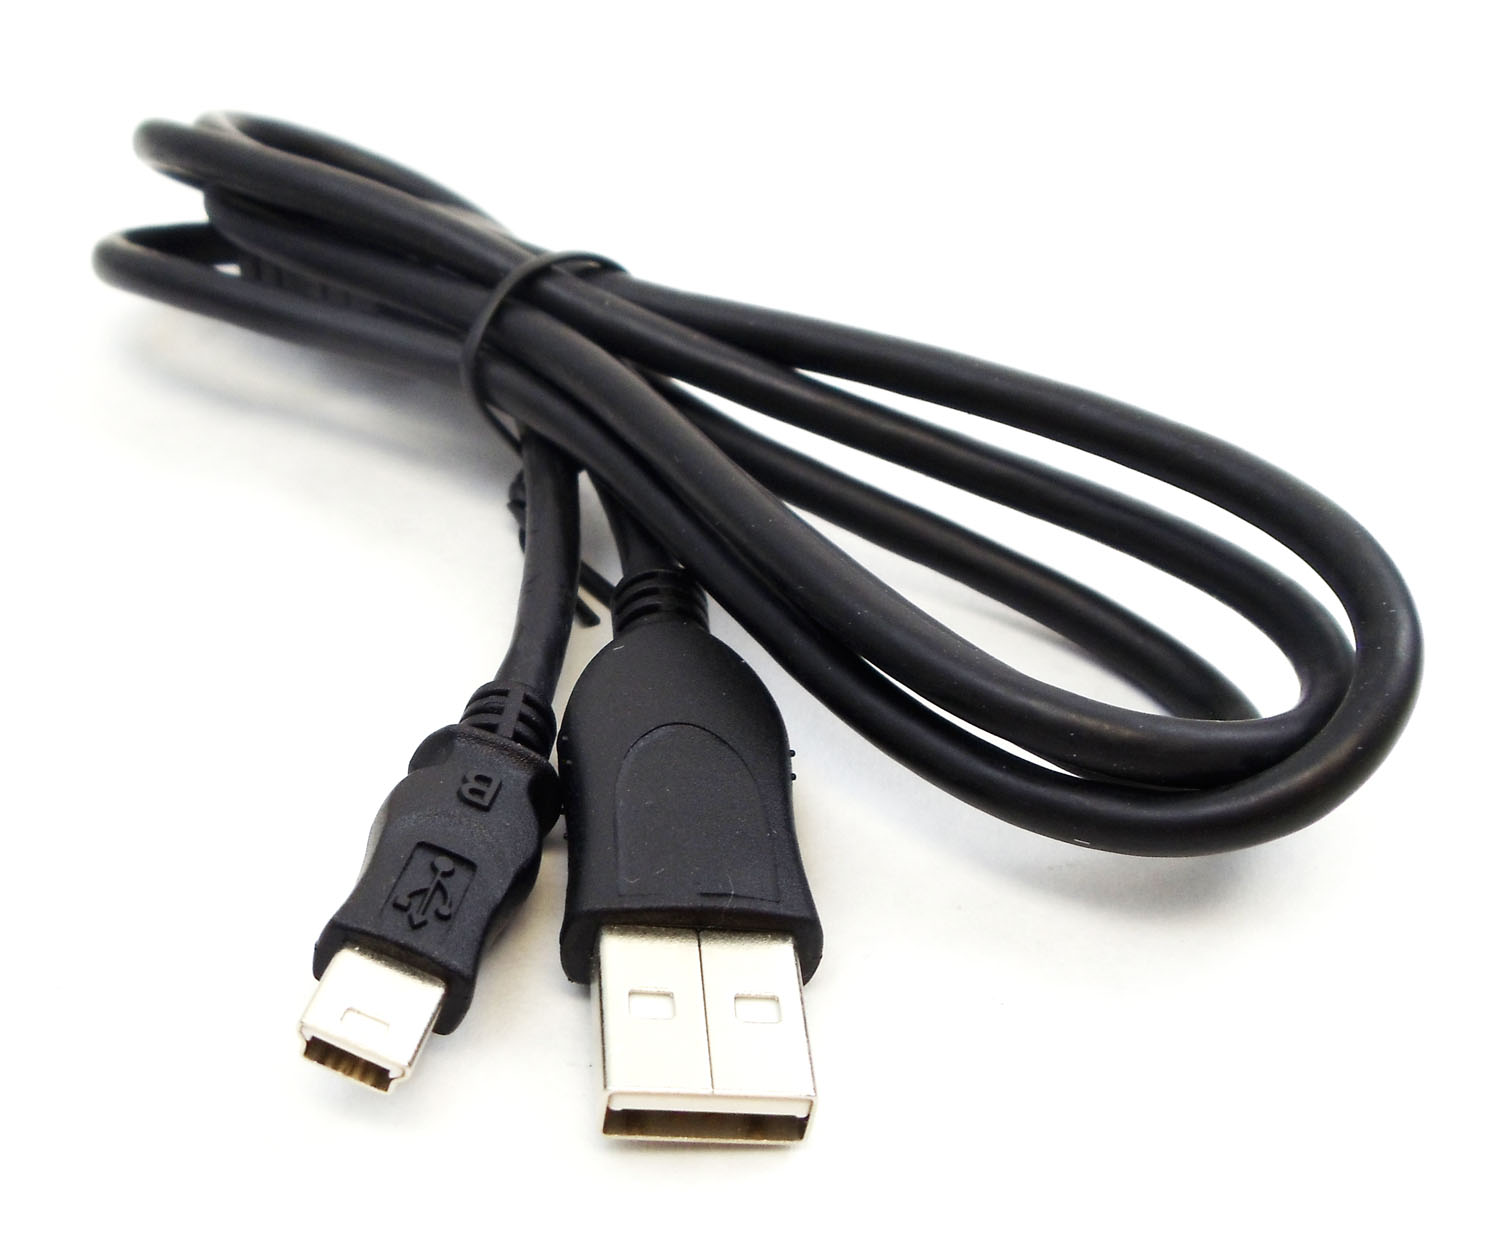 Uniden - USB Replacement Cable For Bcd436Hp, Bc536Hp, Bc125At, Bcd996P2, Bcd325P2 & Homepatrol Scanners